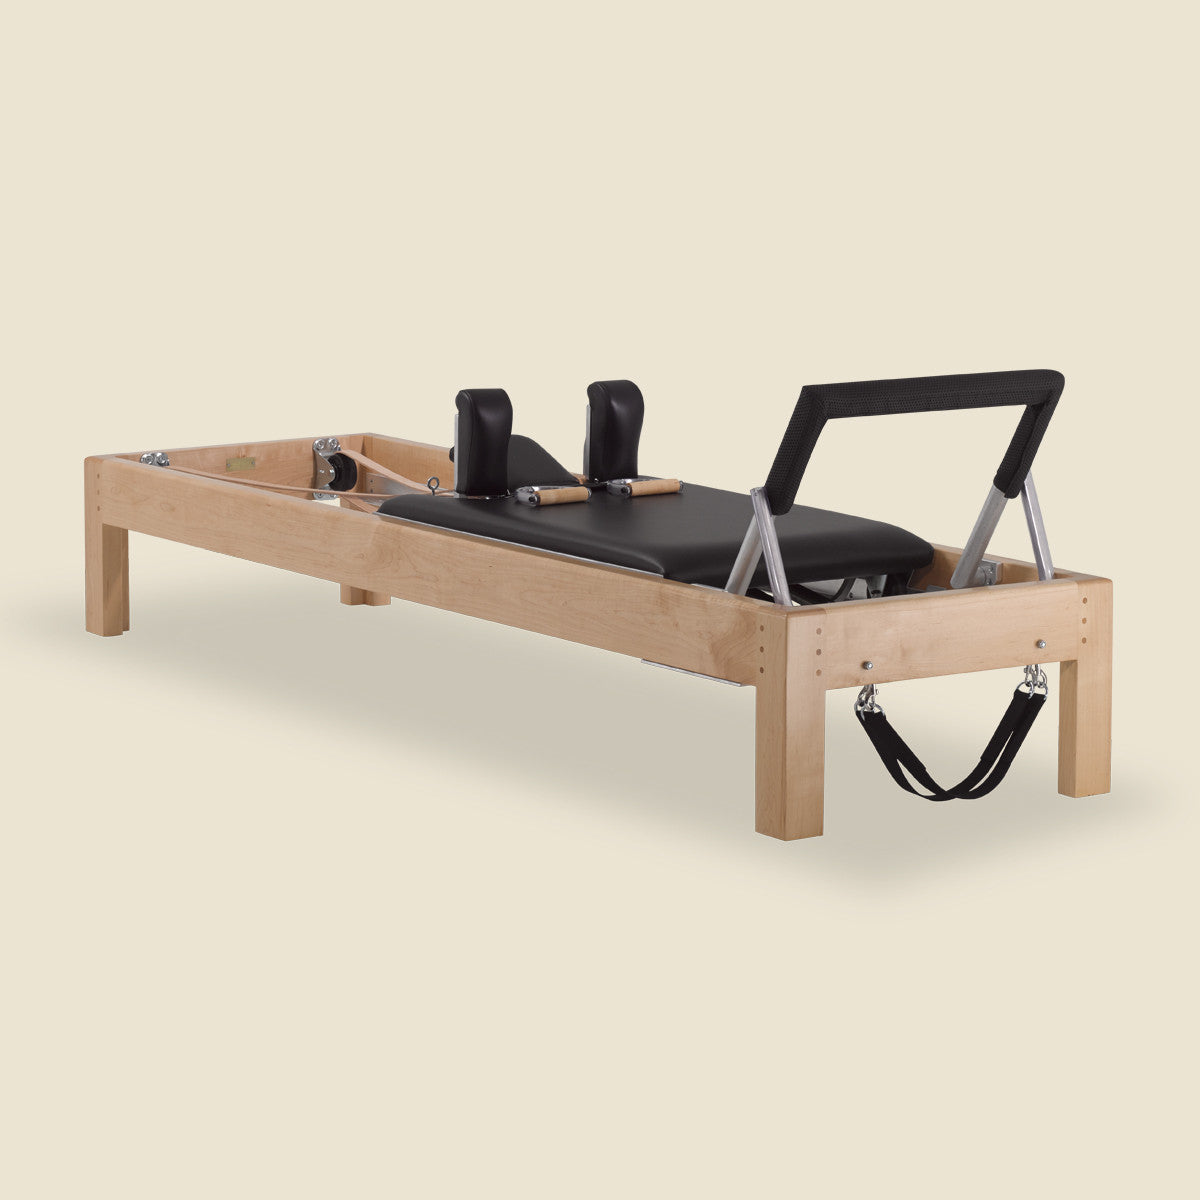 Pilates Equipment for sale : Discover the Complete Pilates Equipment -  Jetzpilates - Medium